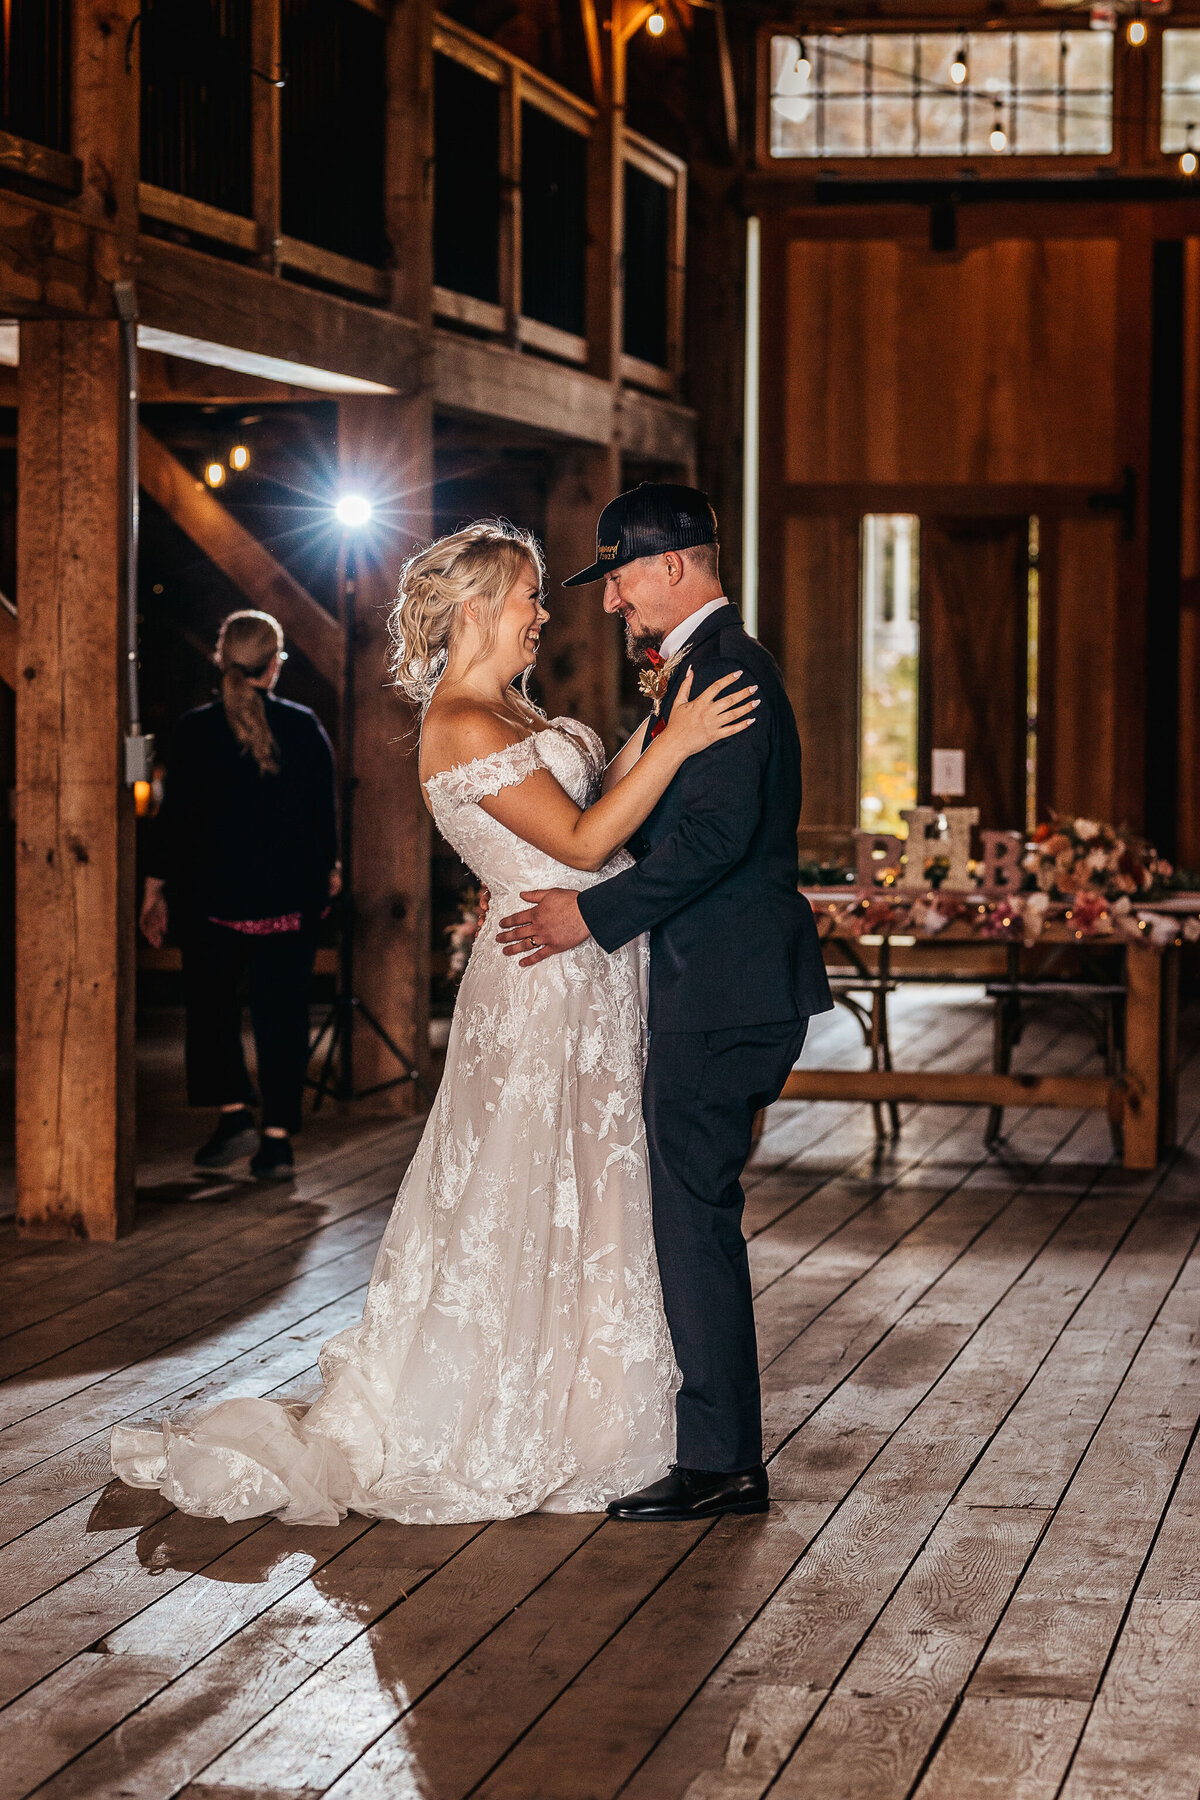 First dance between bride and groom at beautiful barn wedding at Sanborn Hill Farm in Sanborn NH by Lisa Smith Photogrpahy